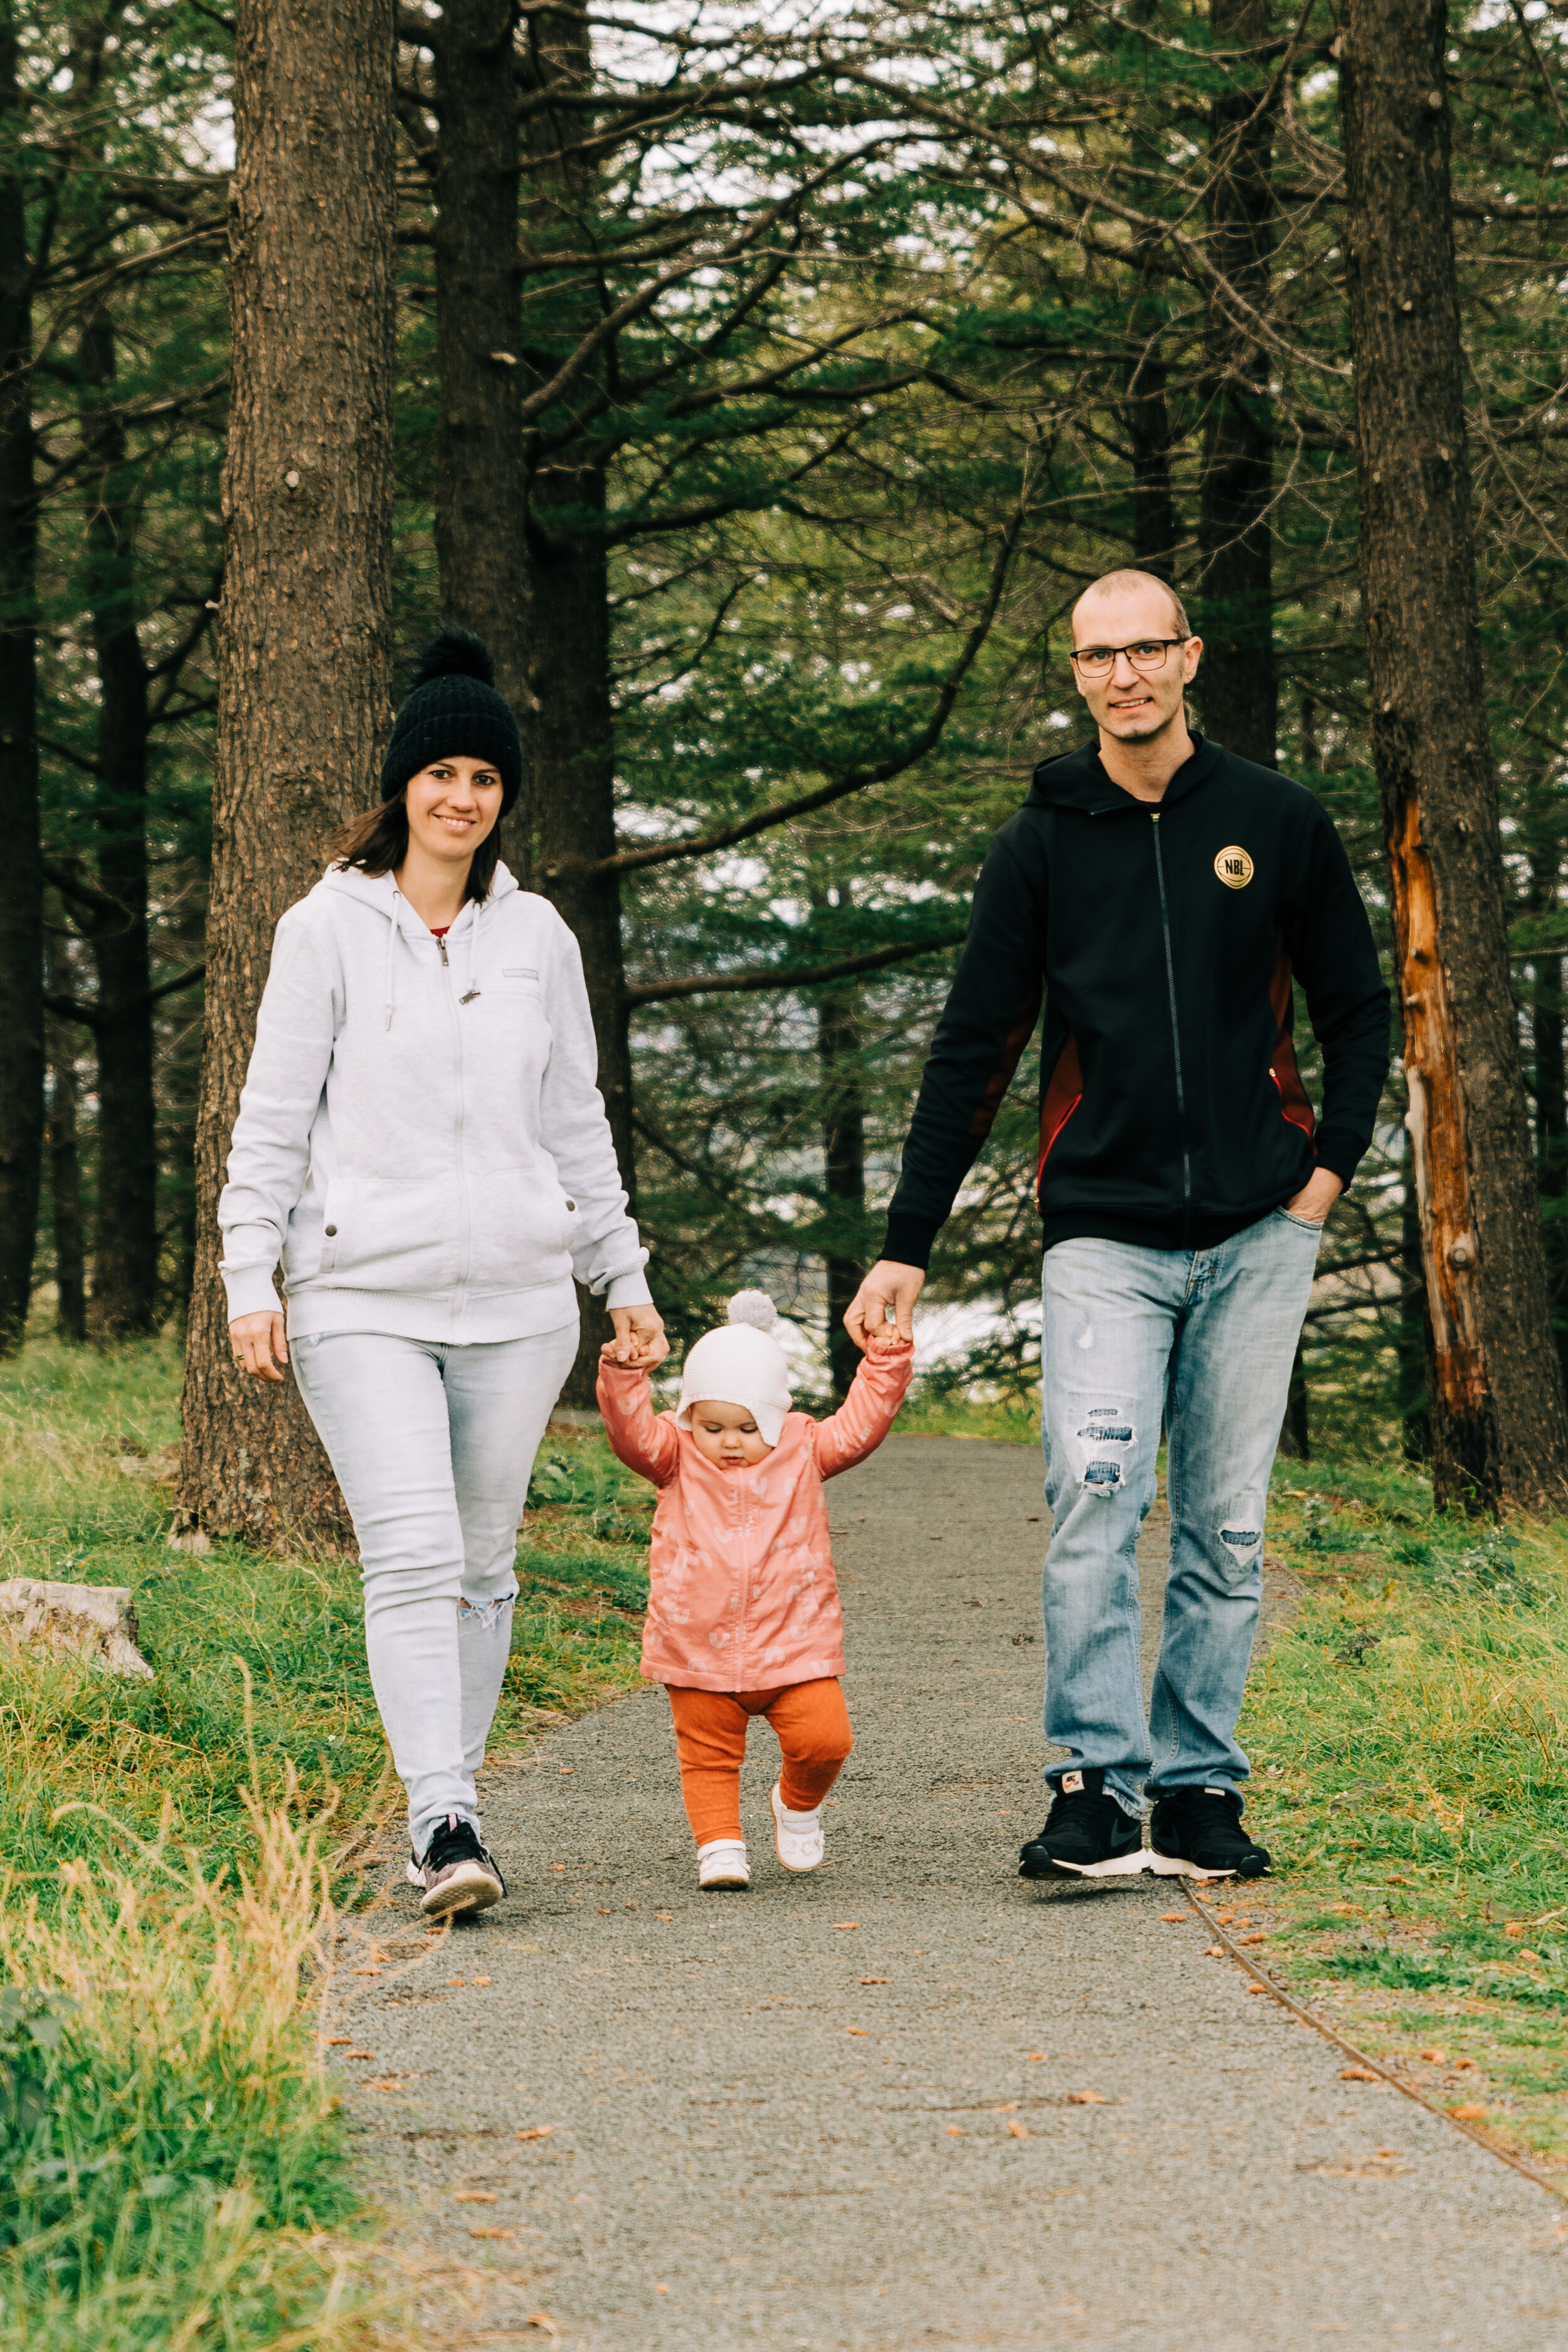 Canberra Family photography: AJ Nitz Images - Family walk down path